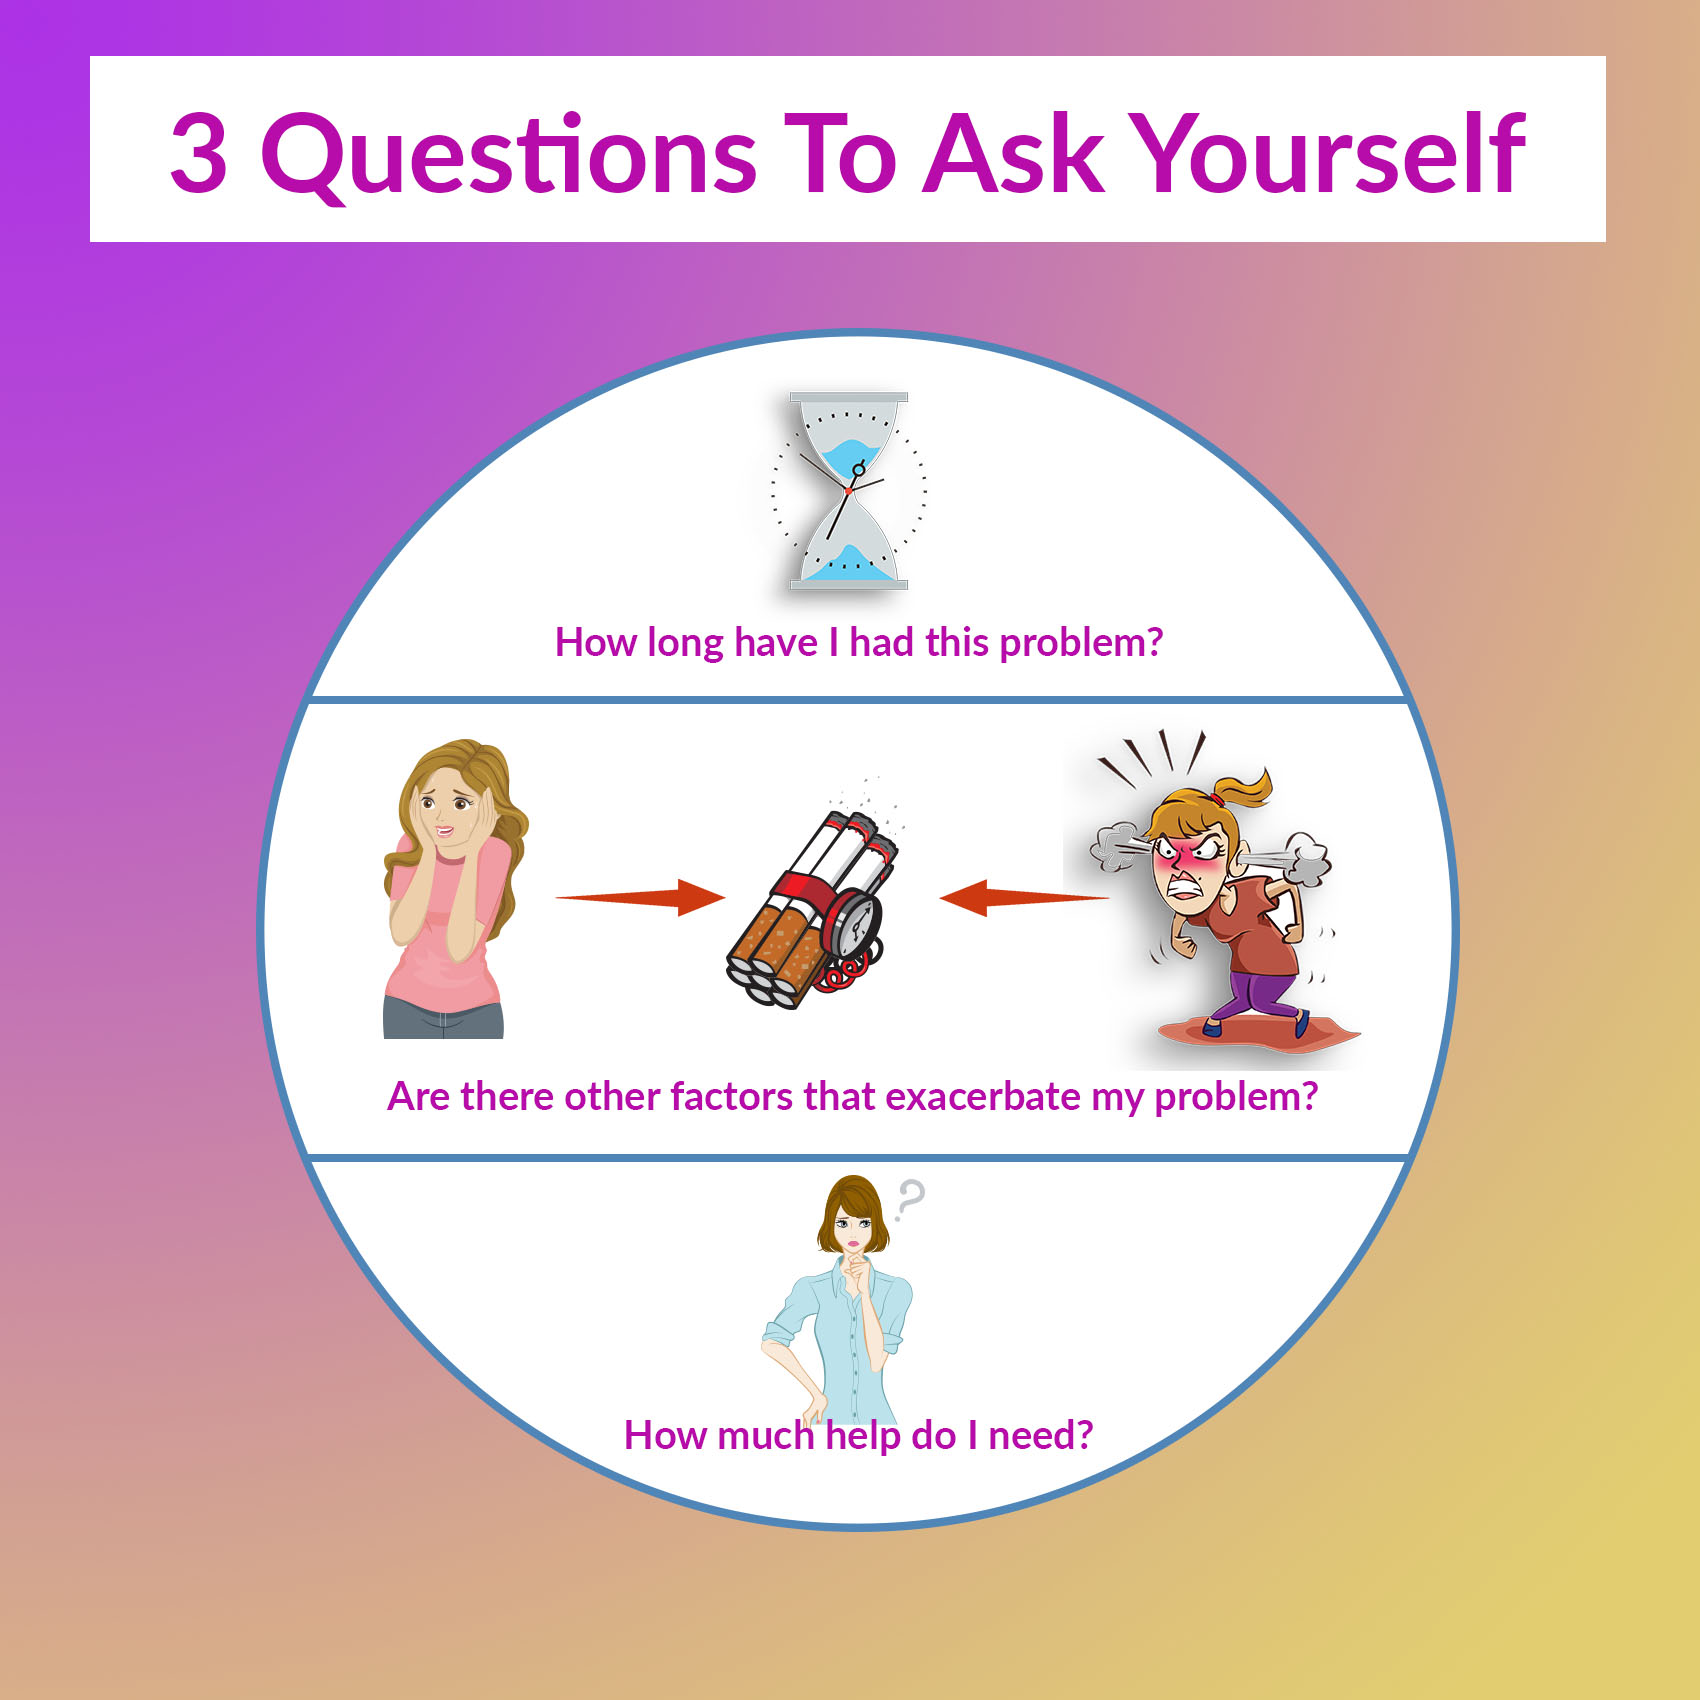 Things you should ask yourself about your own problem